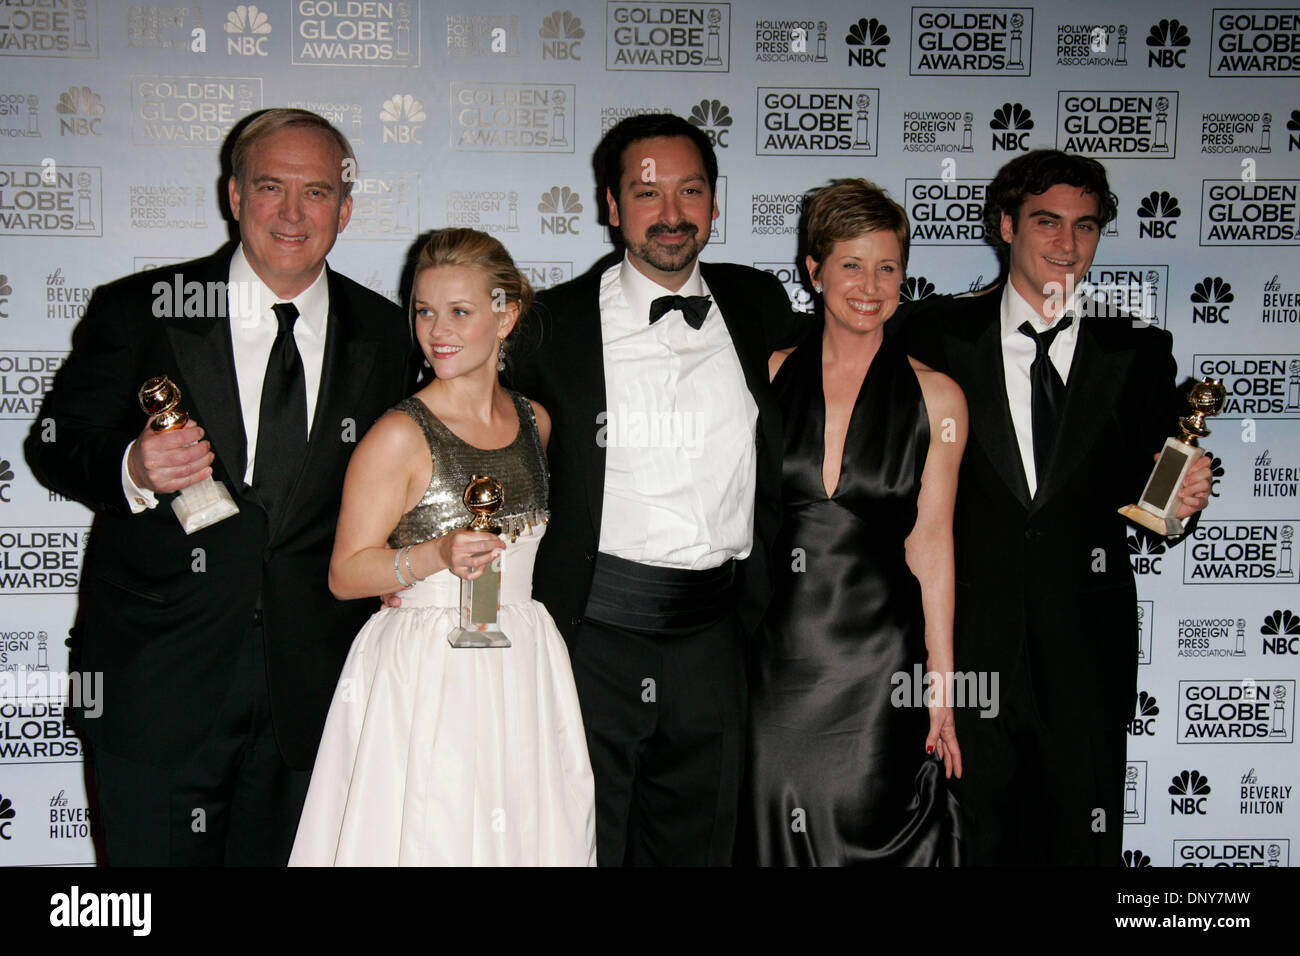 Jan 16, 2006; Beverly Hills, CA, USA; Golden Globes 2006: JOAQUIN PHOENIX, CATHY KONRAD, REESE WITHERSPOON and JAMES KEACH in the press room at the 63rd Annual Golden Globe Awards held at the Beverly Hilton Hotel. Mandatory Credit: Photo by Lisa O'Connor/ZUMA Press. (©) Copyright 2006 by Lisa O'Connor Stock Photo